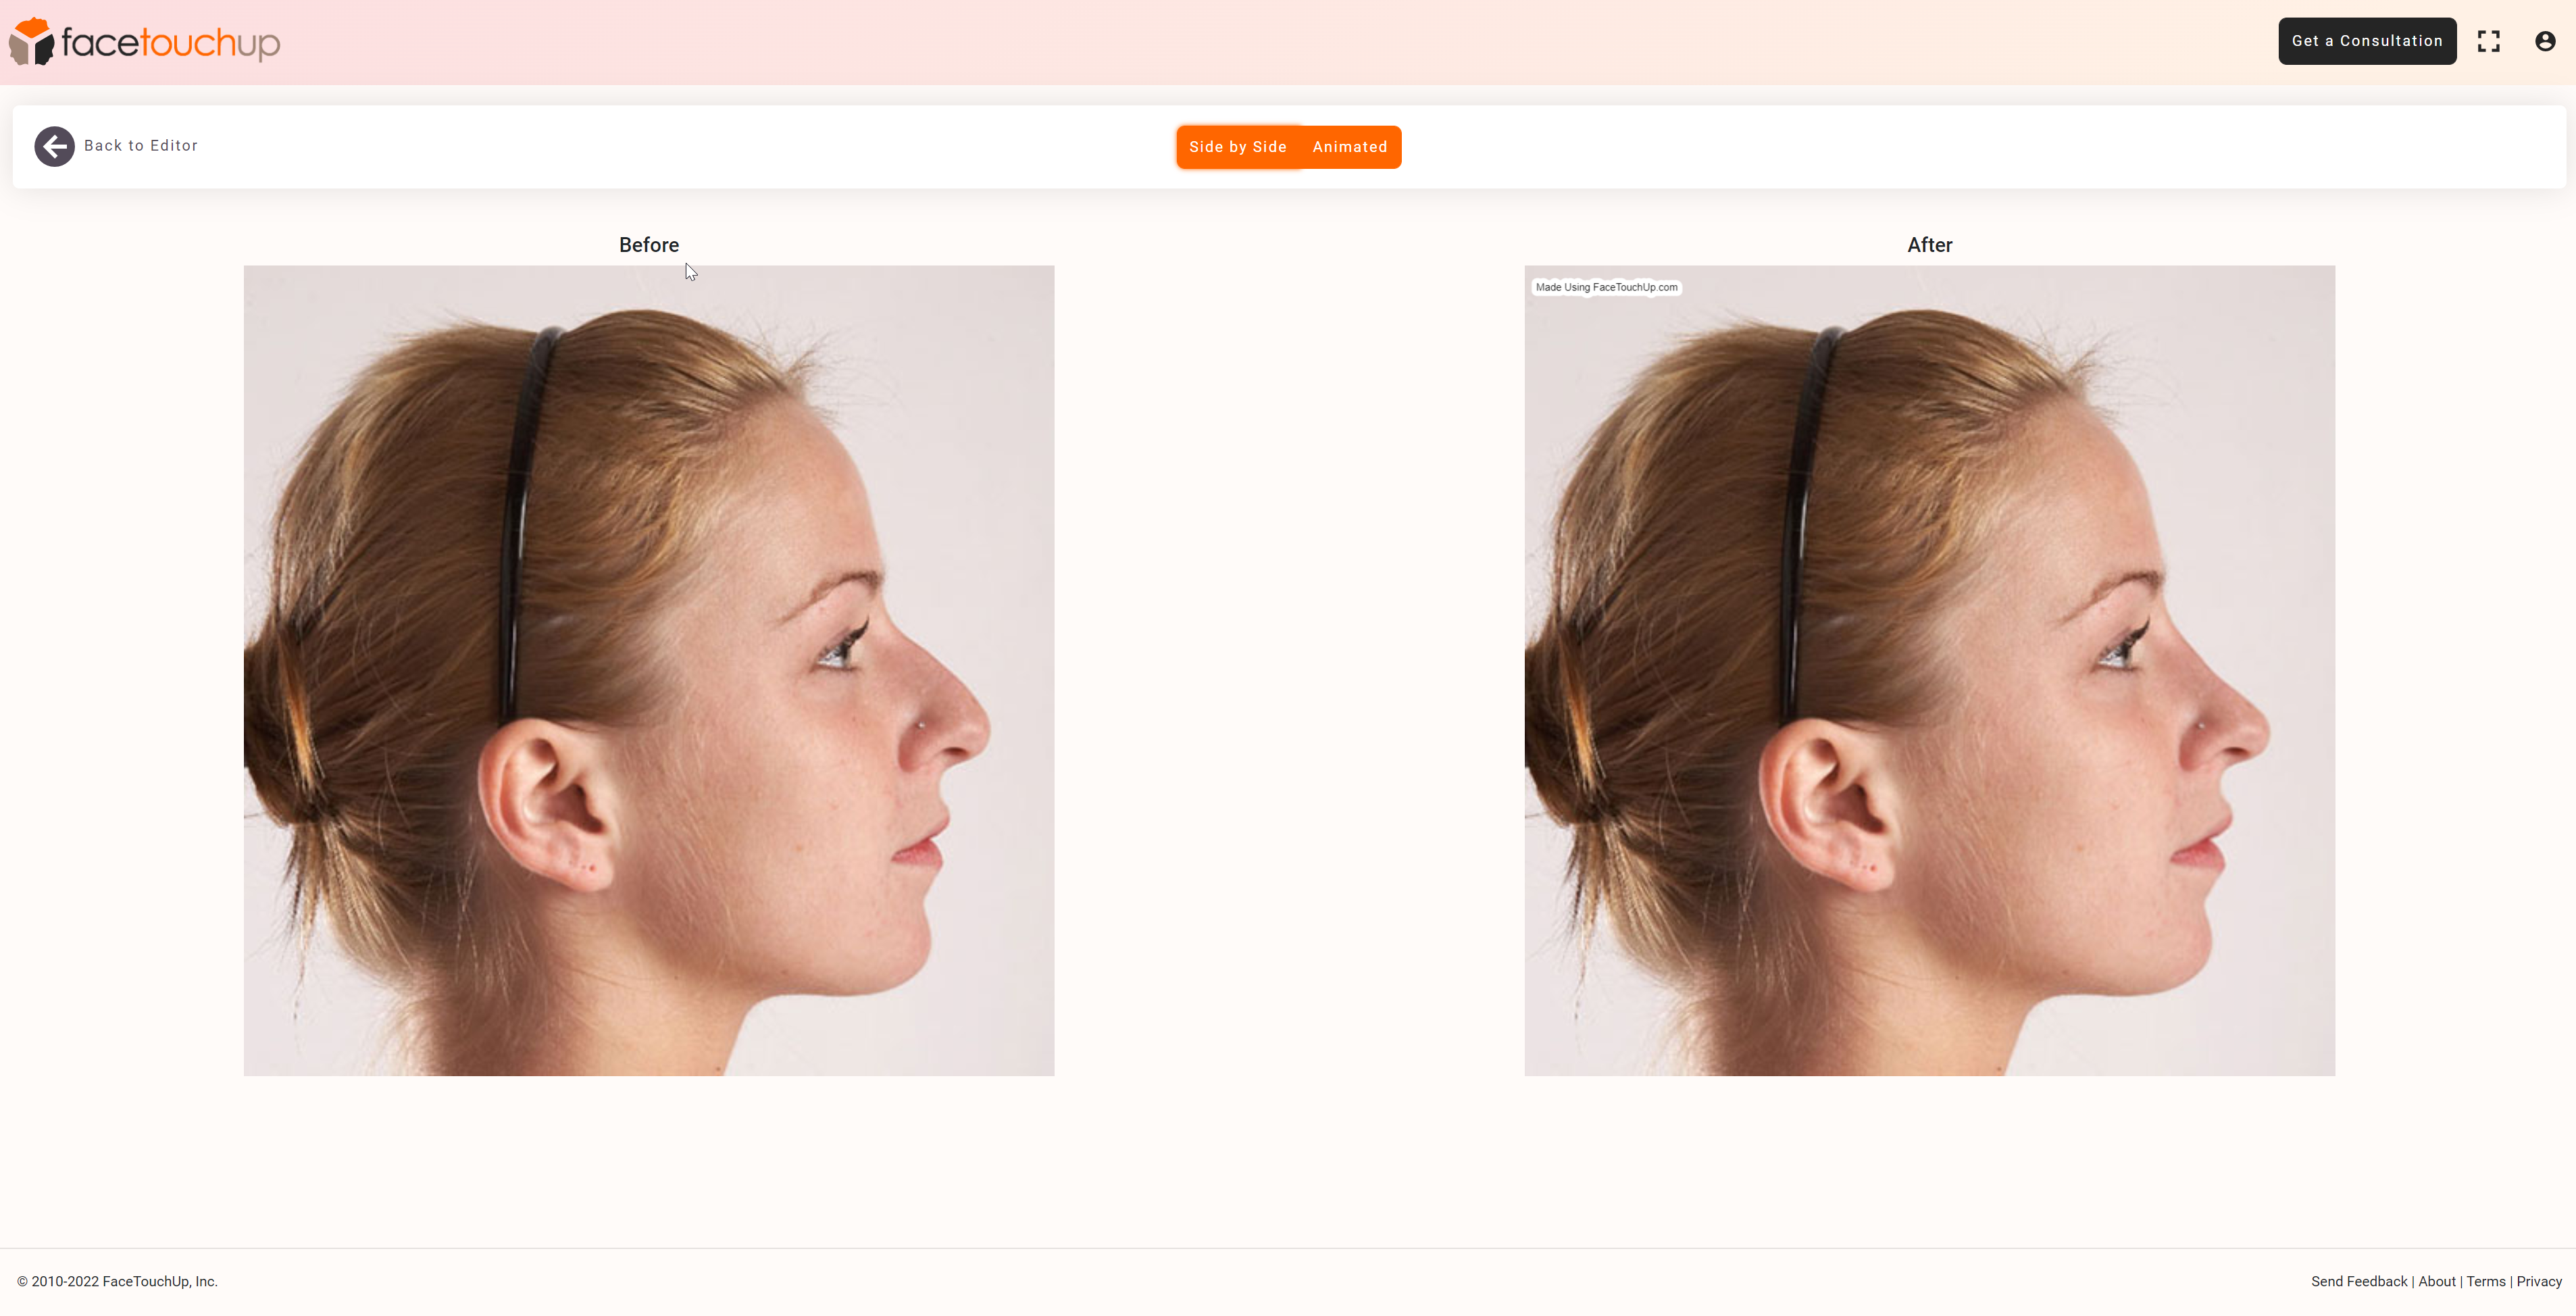 If you’re considering a nose job or rhinoplasty, then you may find it beneficial to upload your photo to a nose job simulation program such as FaceTouchUp. With this tool, you can reshape parts of your nose to experiment.